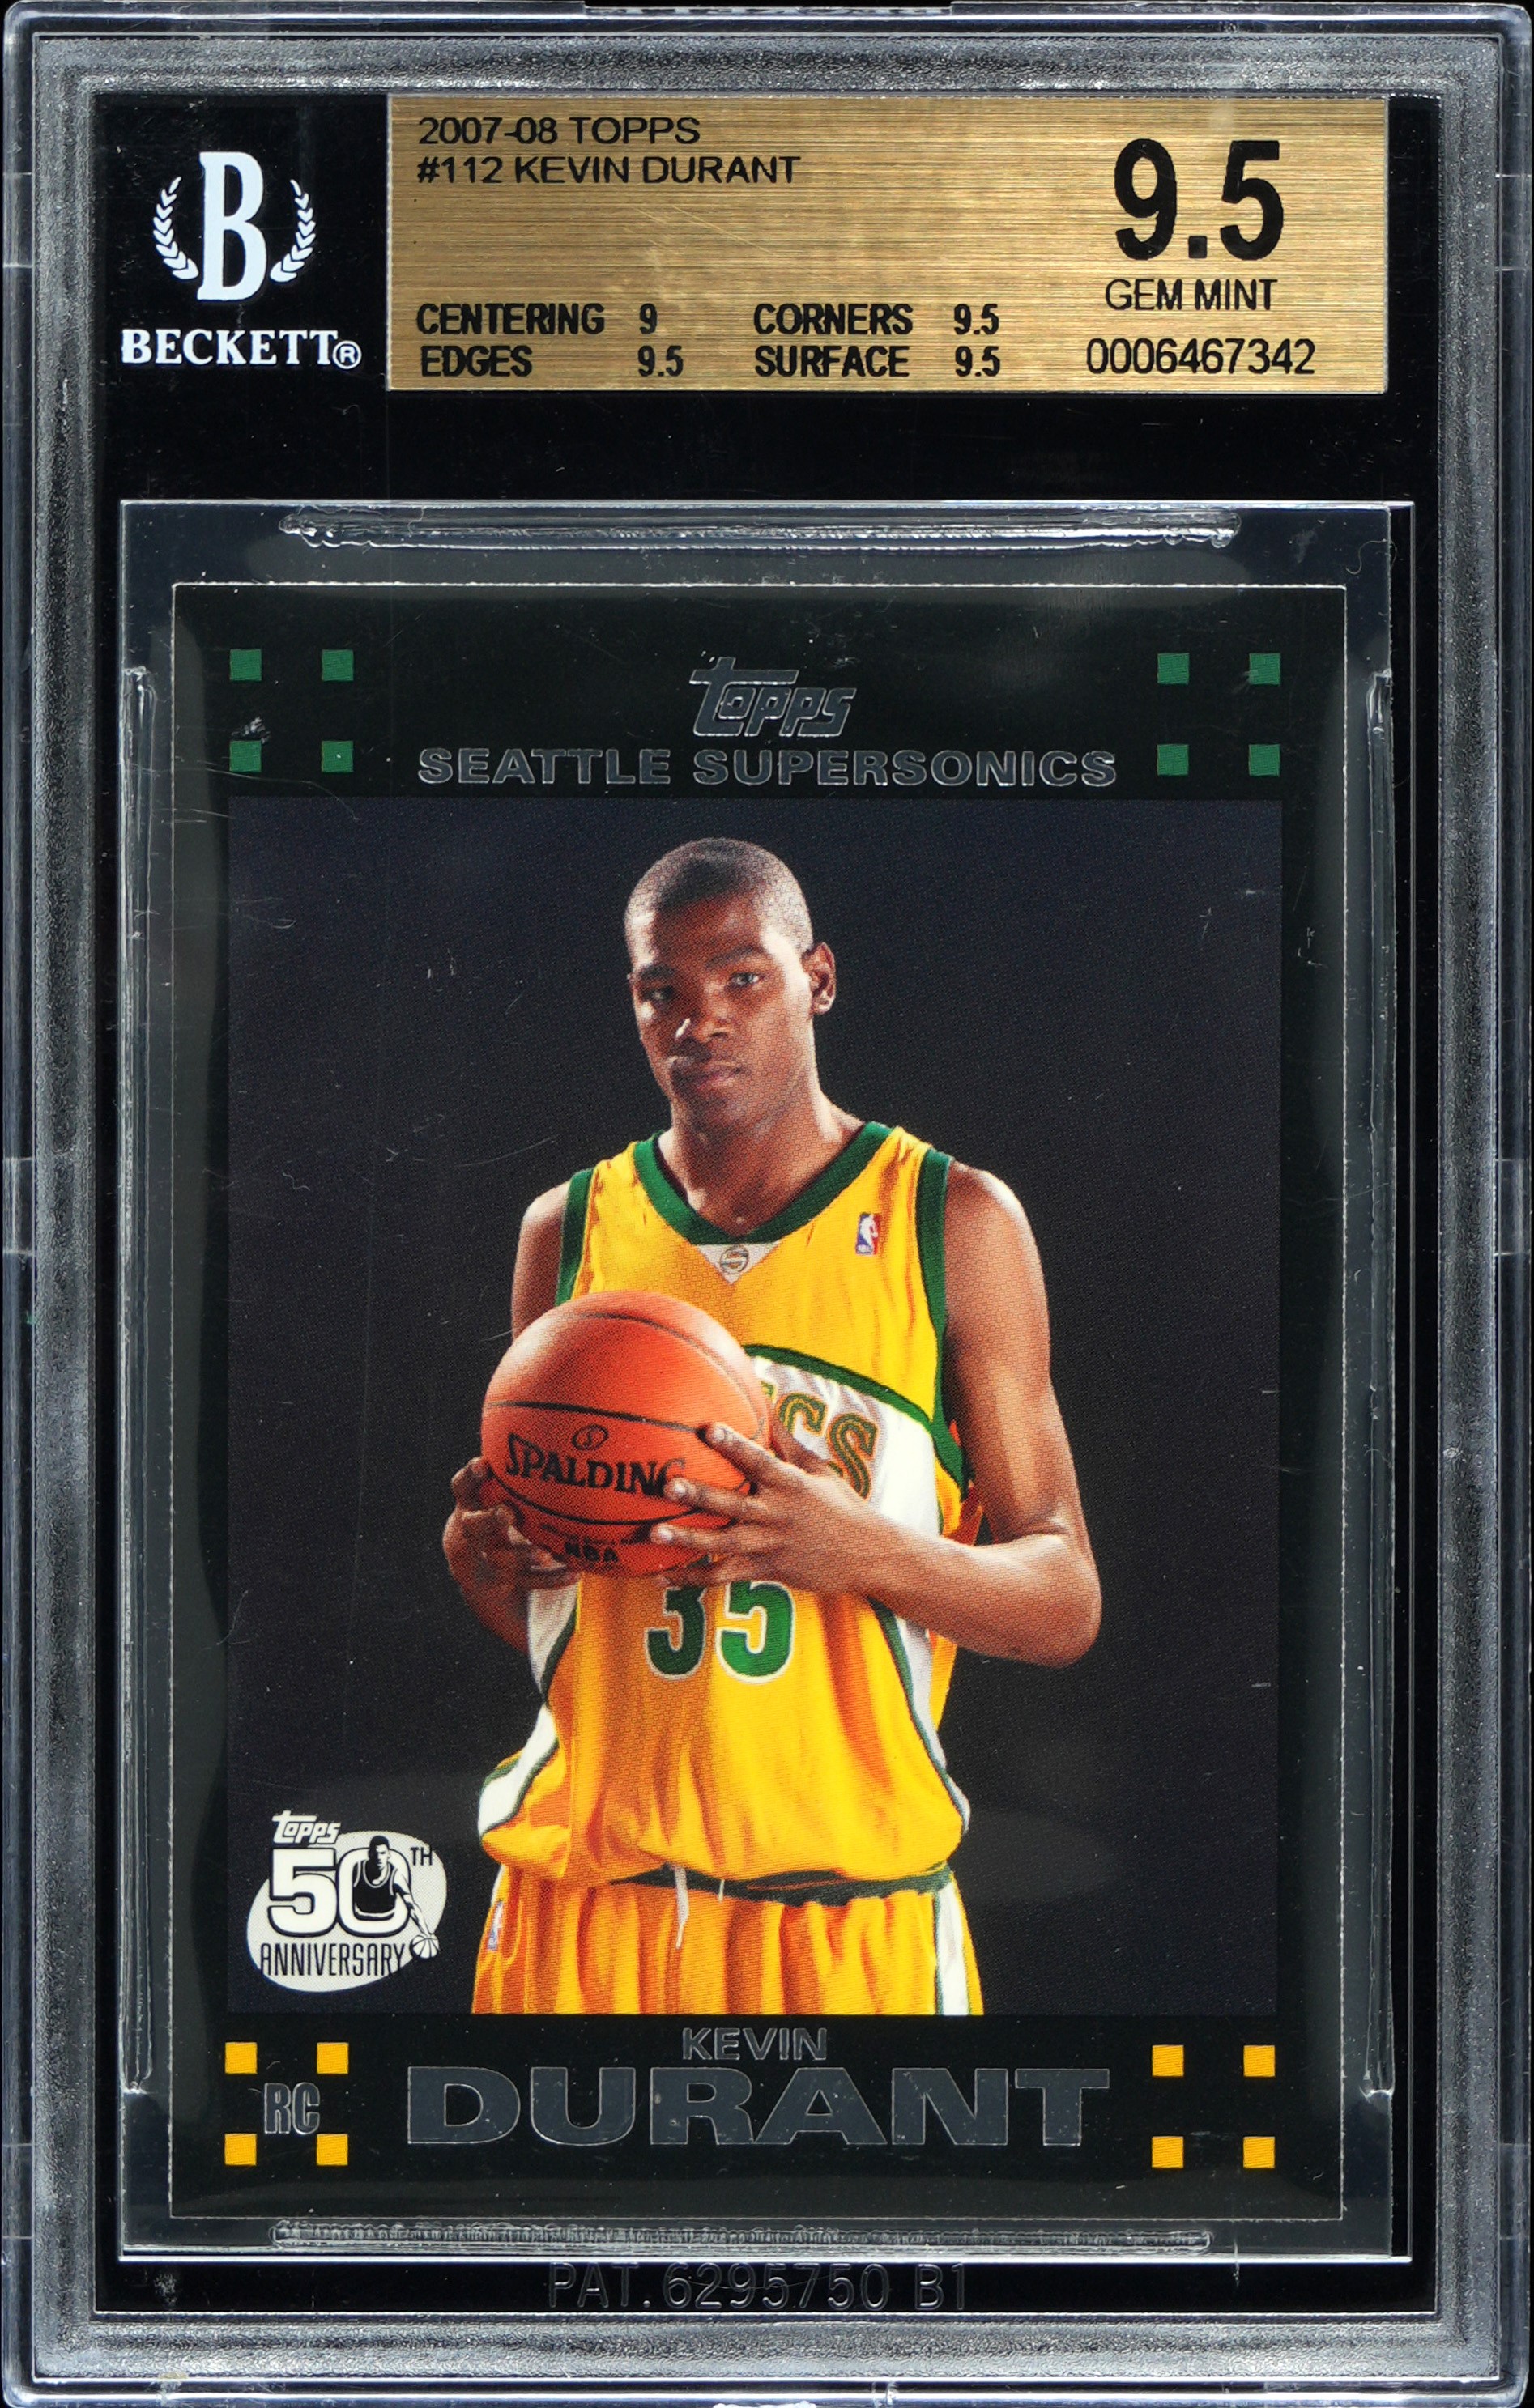 2007-2008 Topps Basketball #112 Kevin Durant Rookie BGS 9.5 GEM MINT